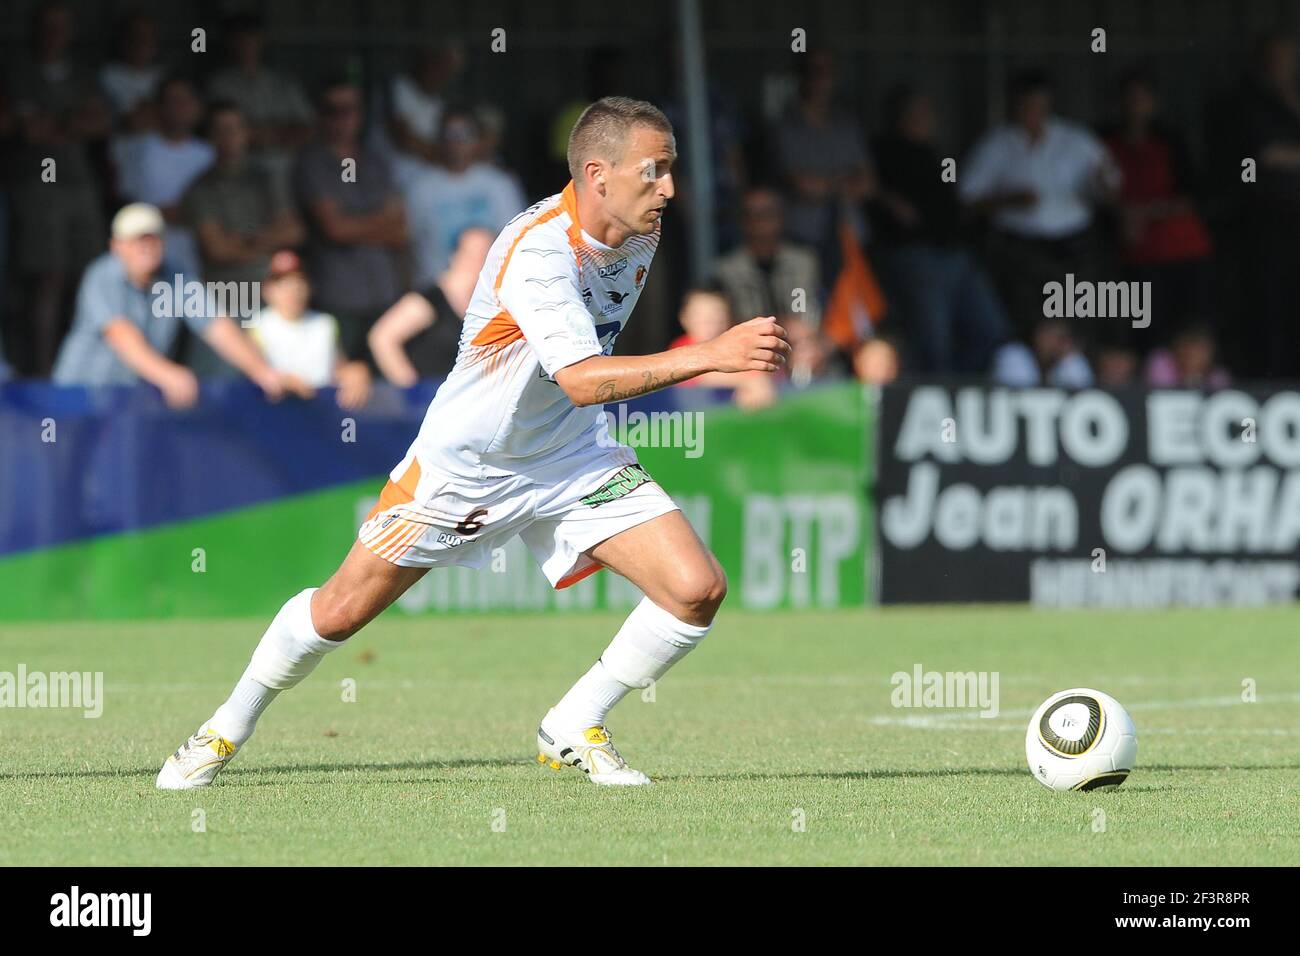 FOOTBALL - FRIENDLY GAMES 2010/2011 - FC LORIENT v STADE LAVALLOIS - 10/07/2010 - PHOTO PASCAL ALLEE / DPPI - ANTHONY GONCALVES (LAV) Stock Photo